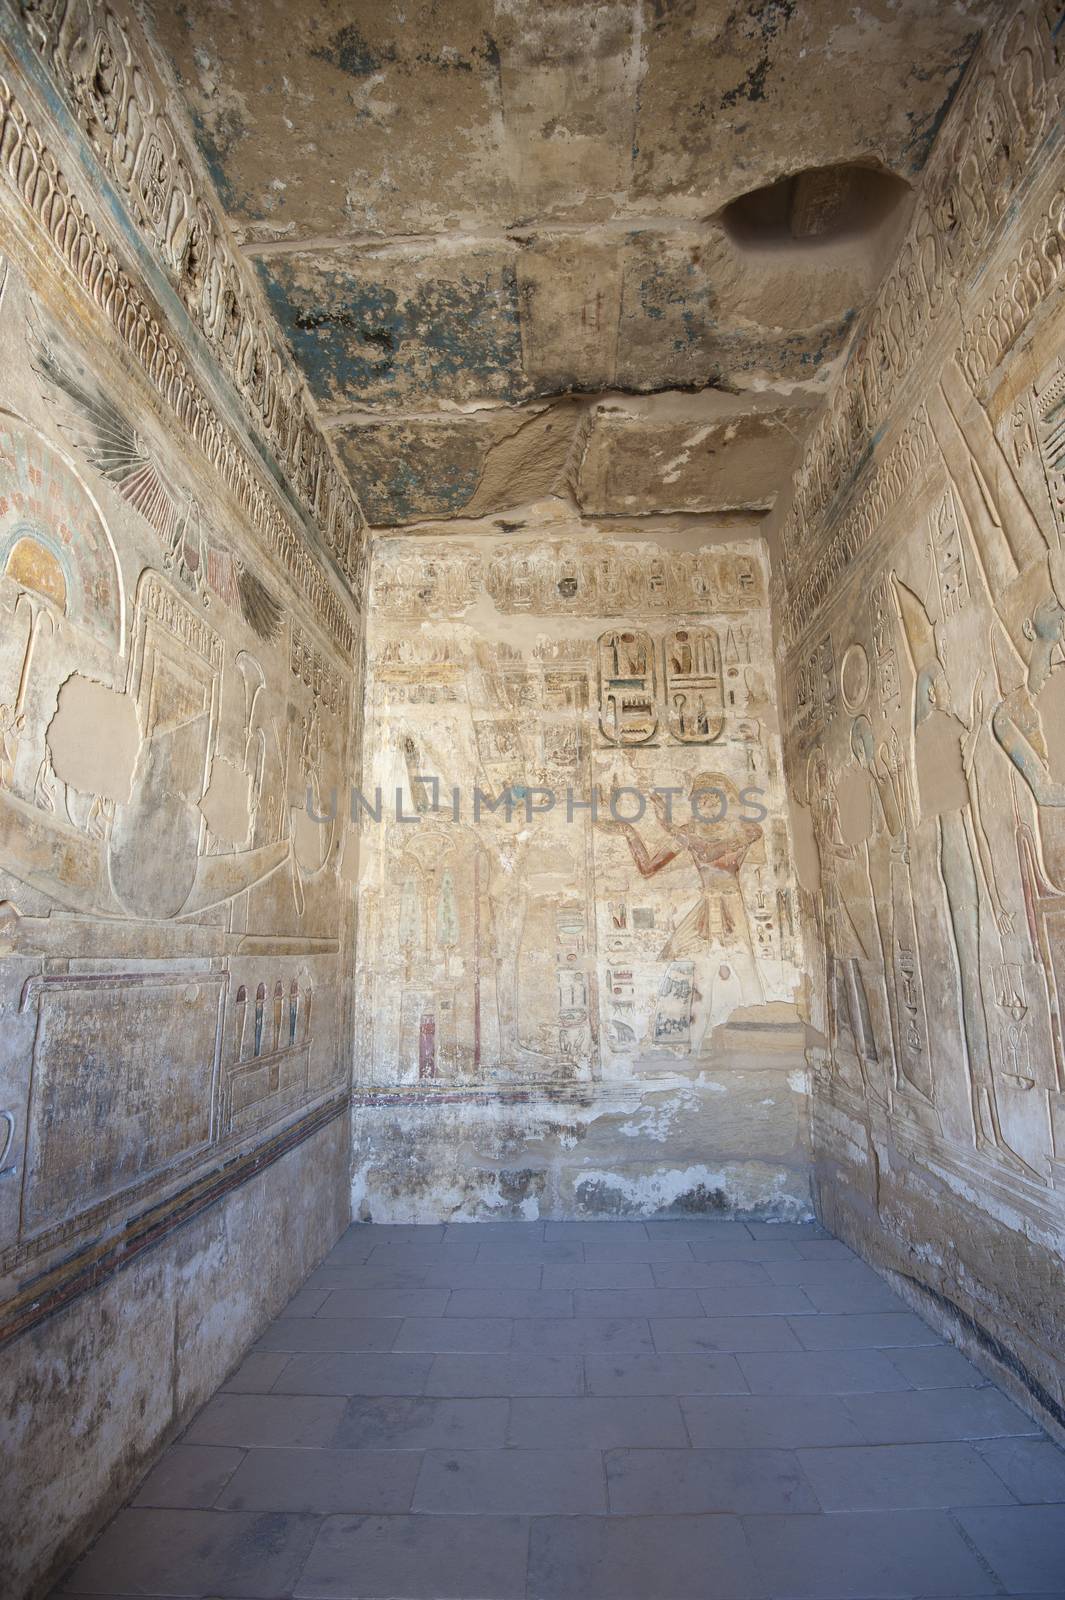 Egyptian hieroglyphic carvings and paintings on interior wall of the ancient temple at Medinat Habu in Luxor